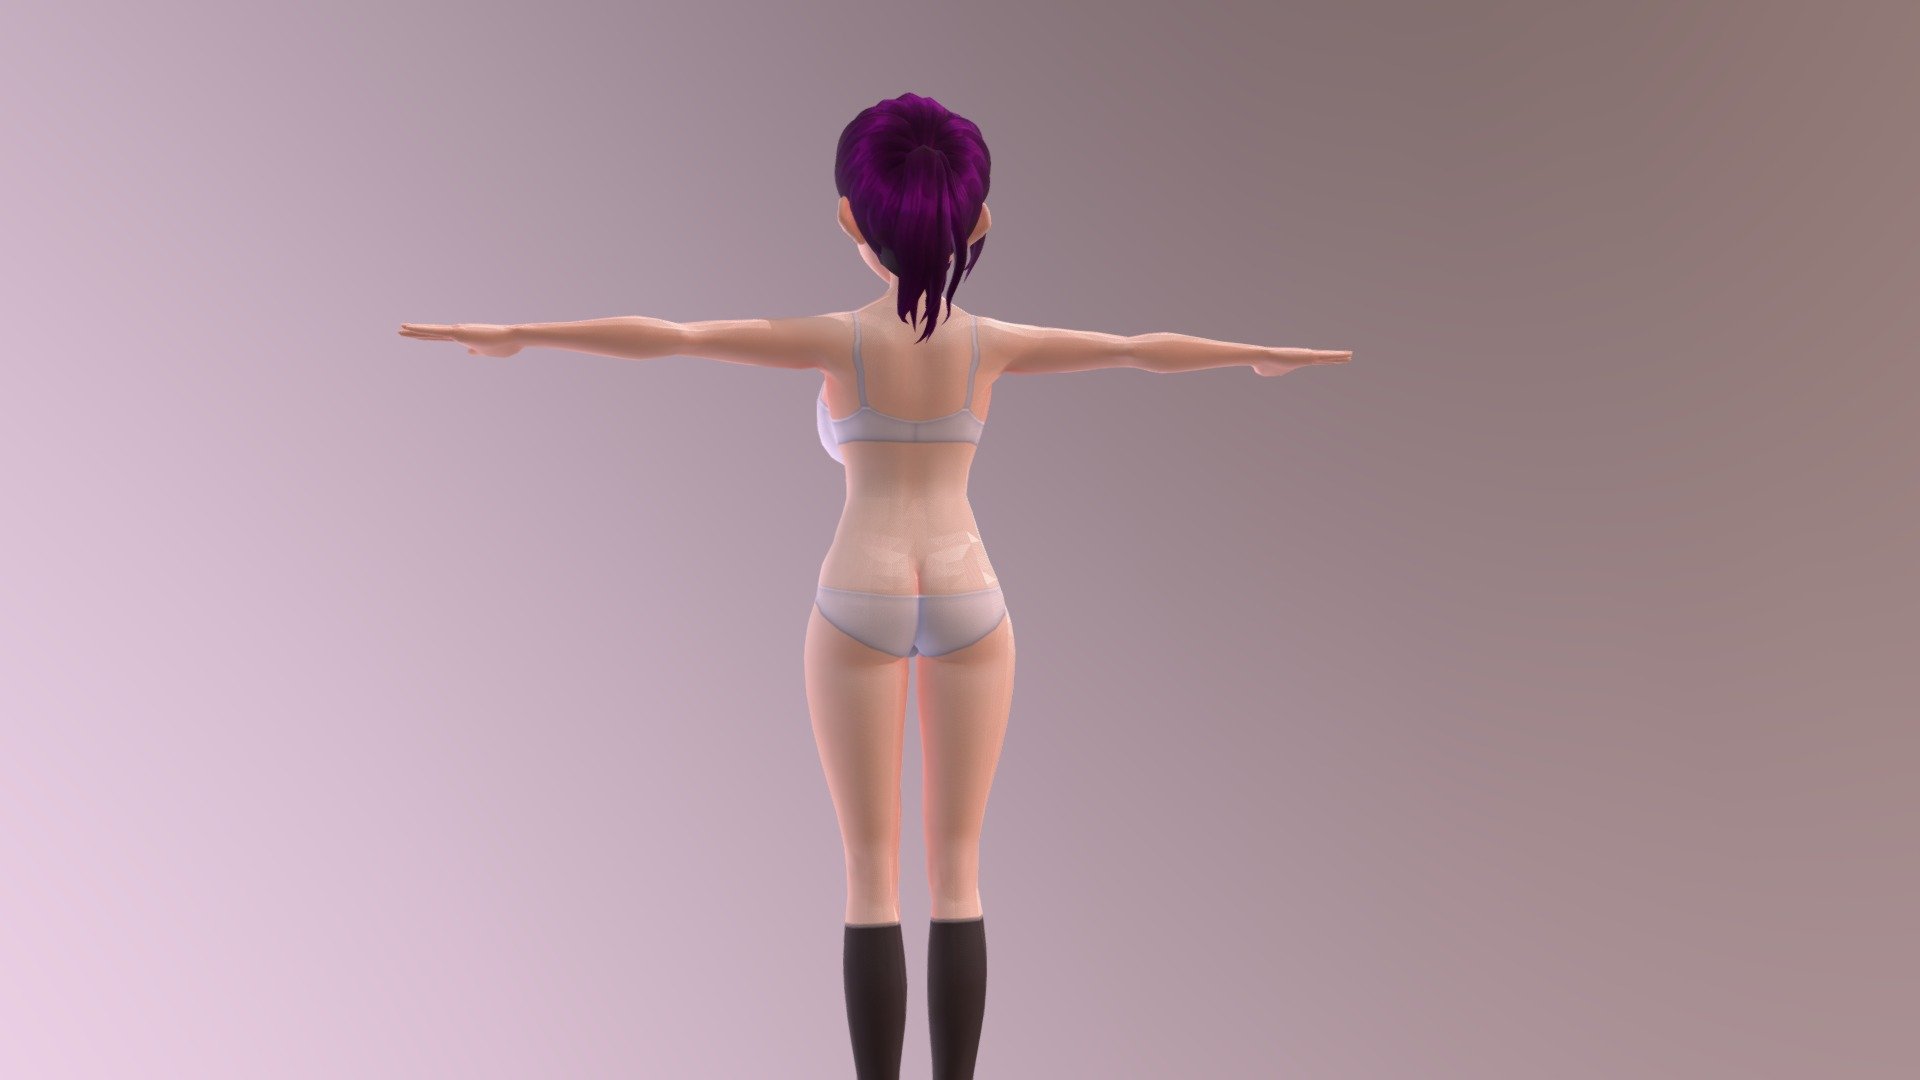 If you like my work, please  buymeacoffe
https://www.buymeacoffee.com/unity3dmobx

Bigger melons, different hairstyle and better eyelash texture
Low poly anime avatar, fully rigged and ready for vrchat or game 3d model